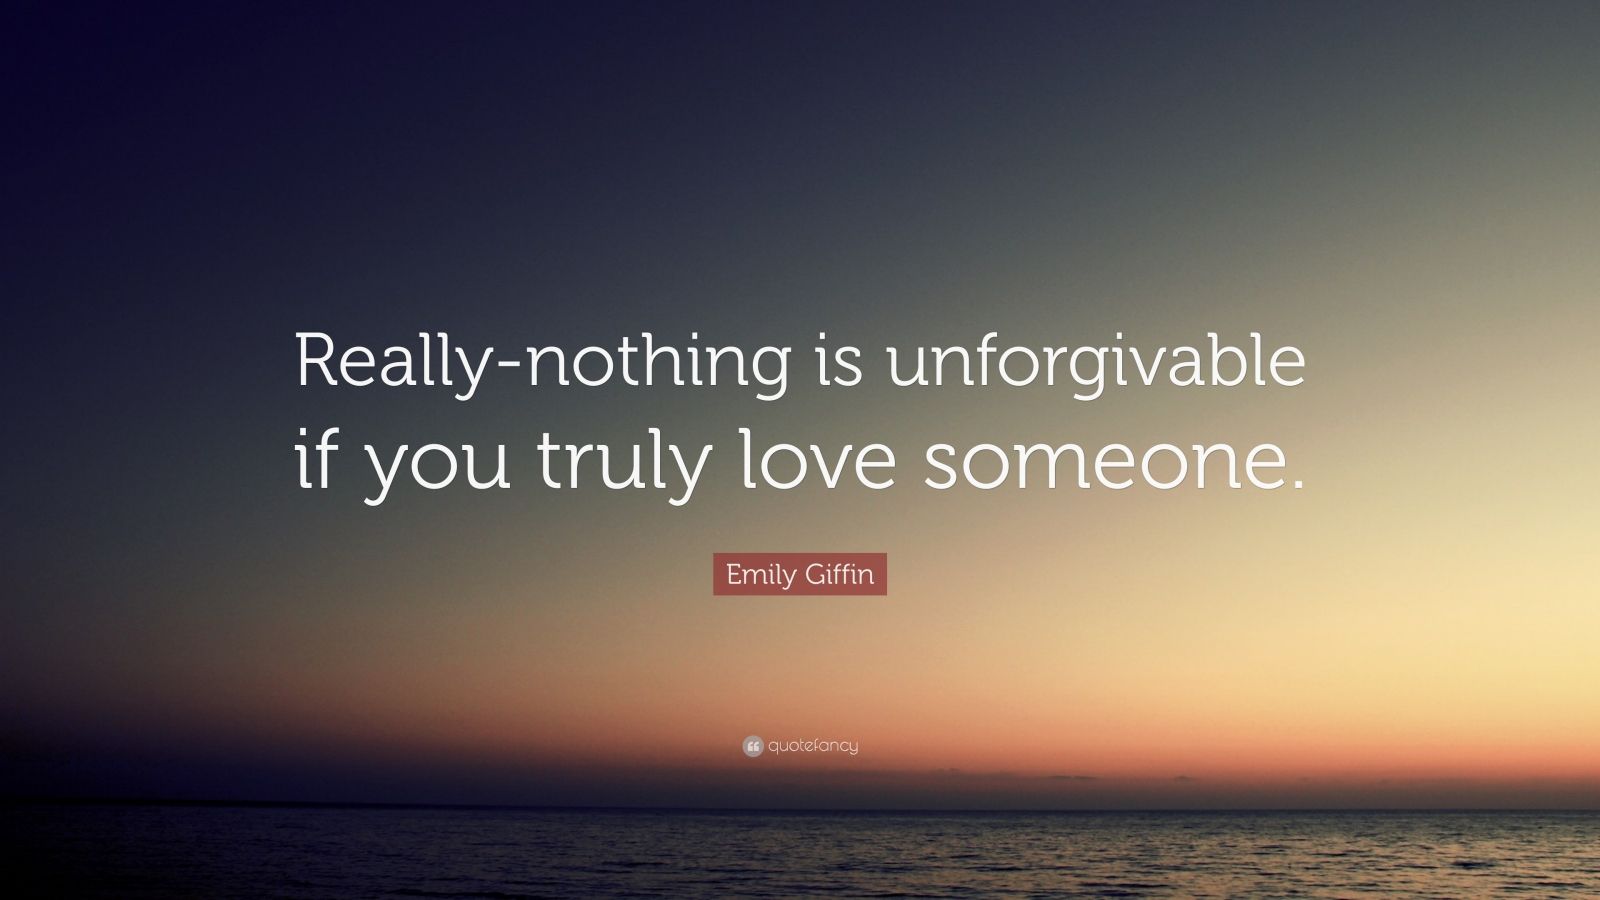 Emily Giffin Quote: “Really-nothing is unforgivable if you truly love ...